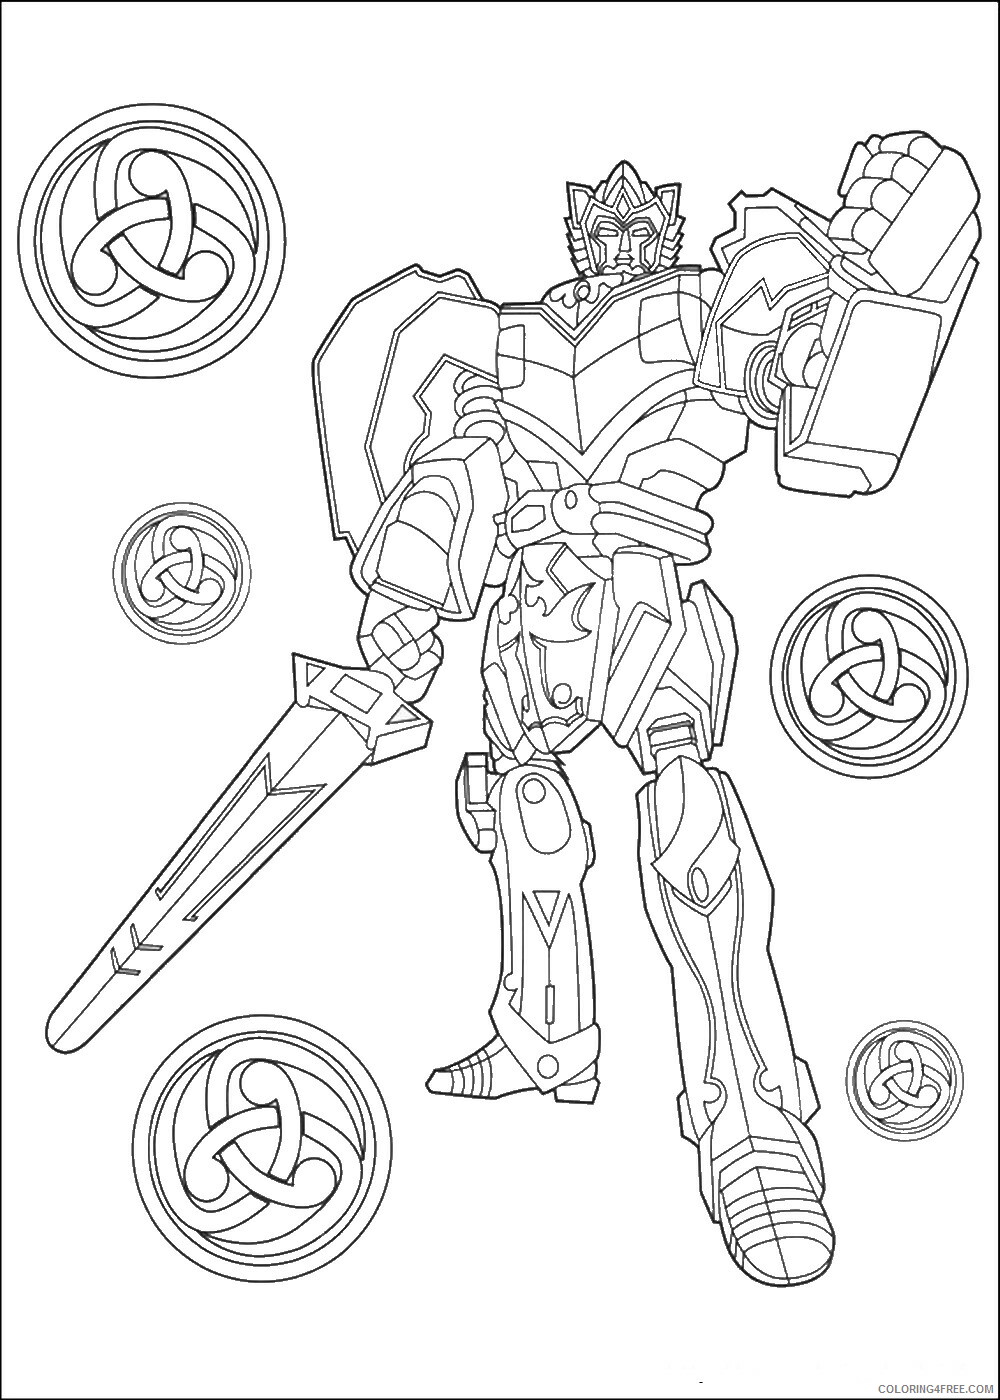 Power Rangers Coloring Pages TV Film power rangers 103 Printable 2020 06714 Coloring4free